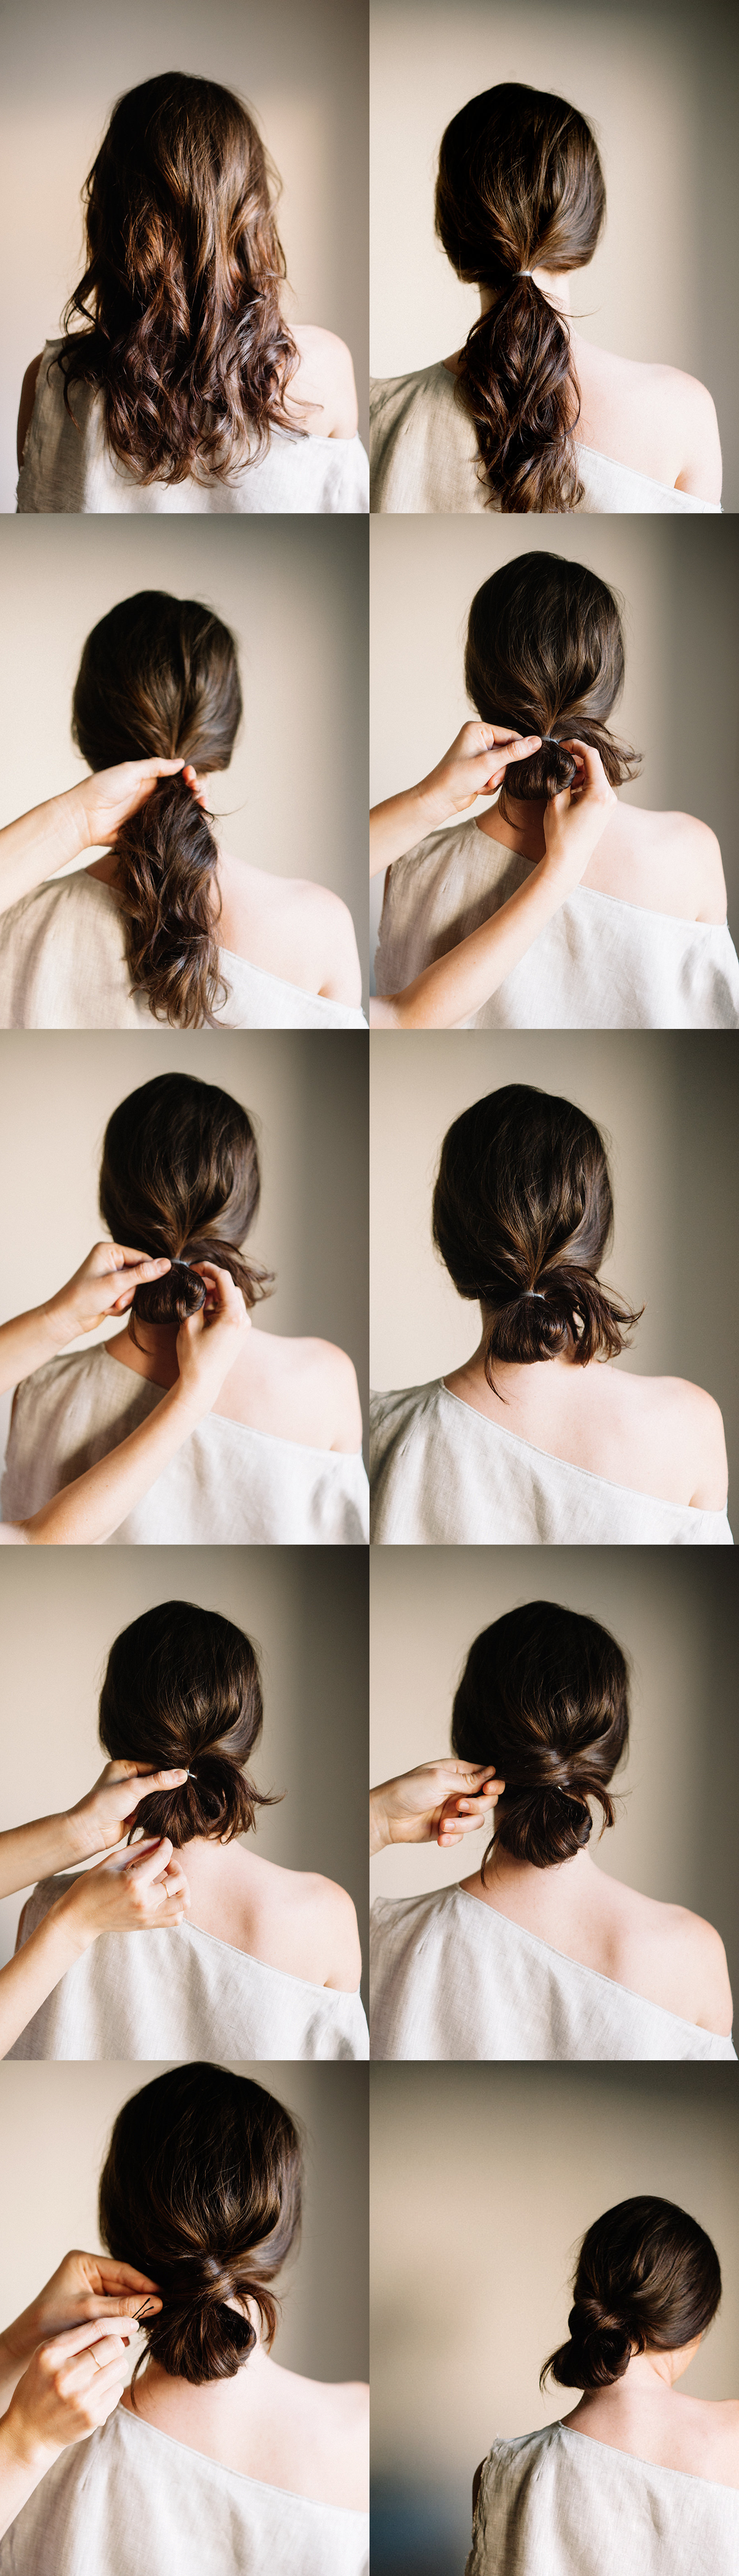 diy-low-knot-wedding-hairstyles-for-long-hair